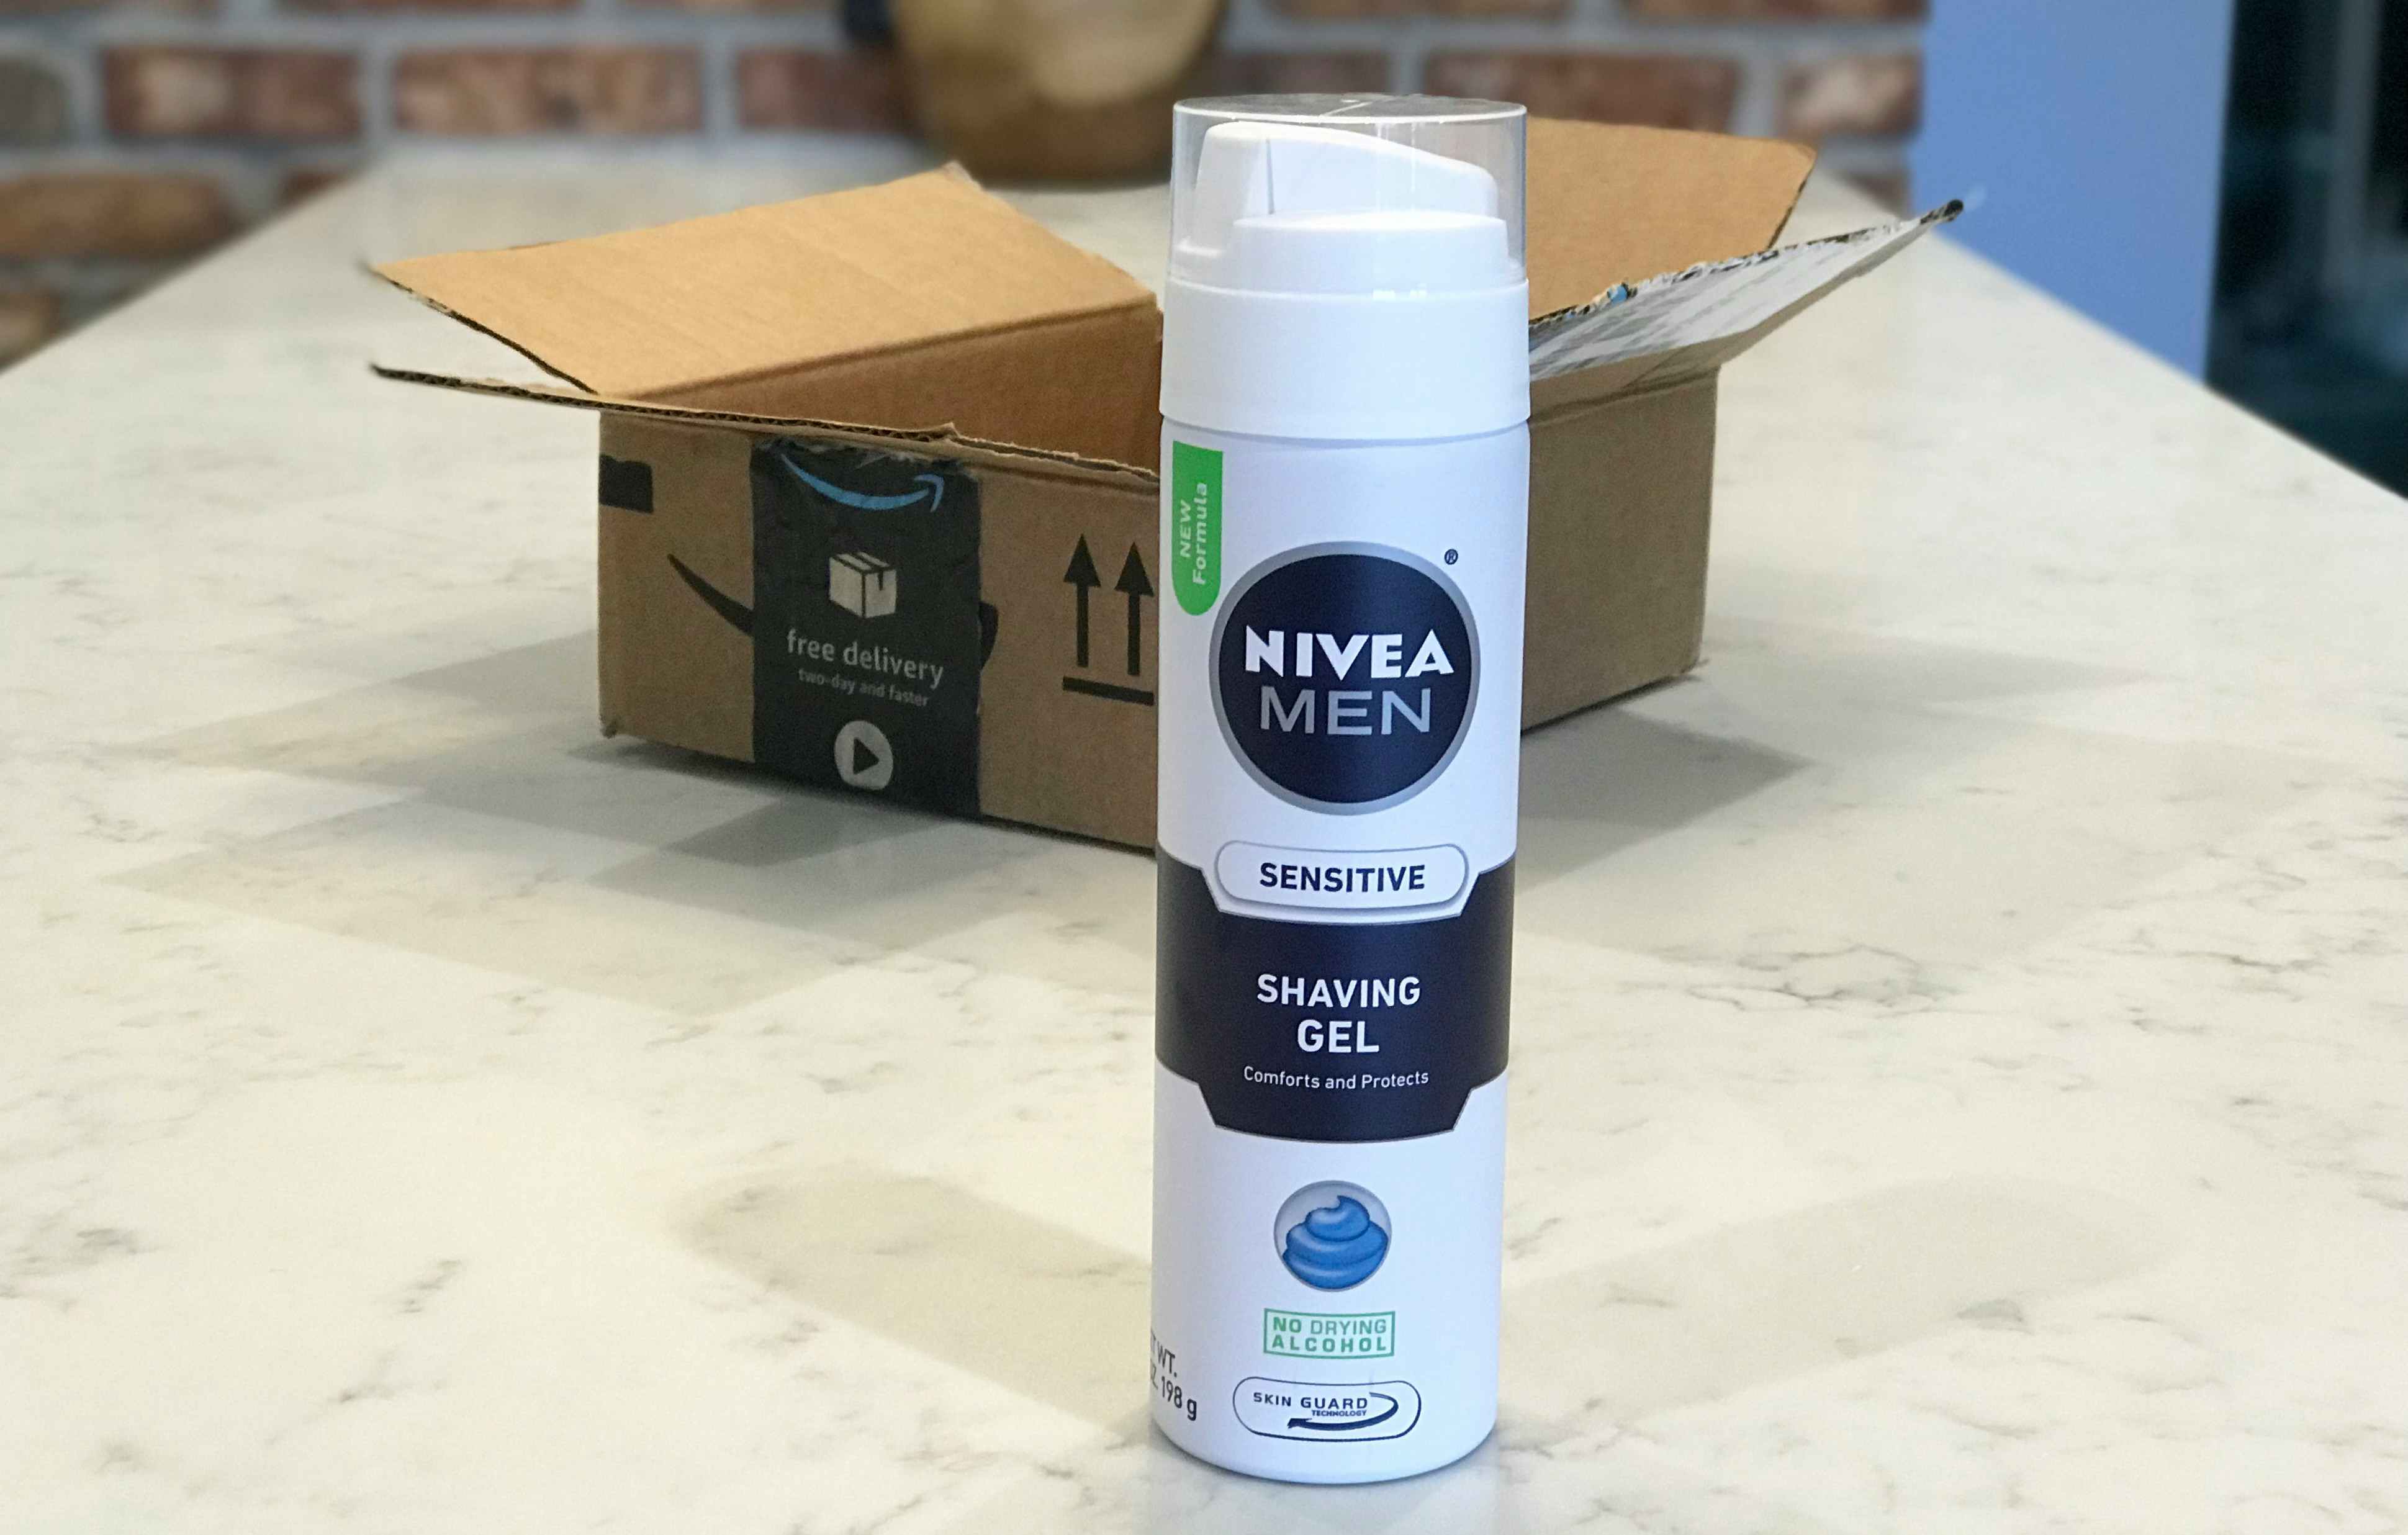 A bottle of Nivea Men shave gel in front of an open box.